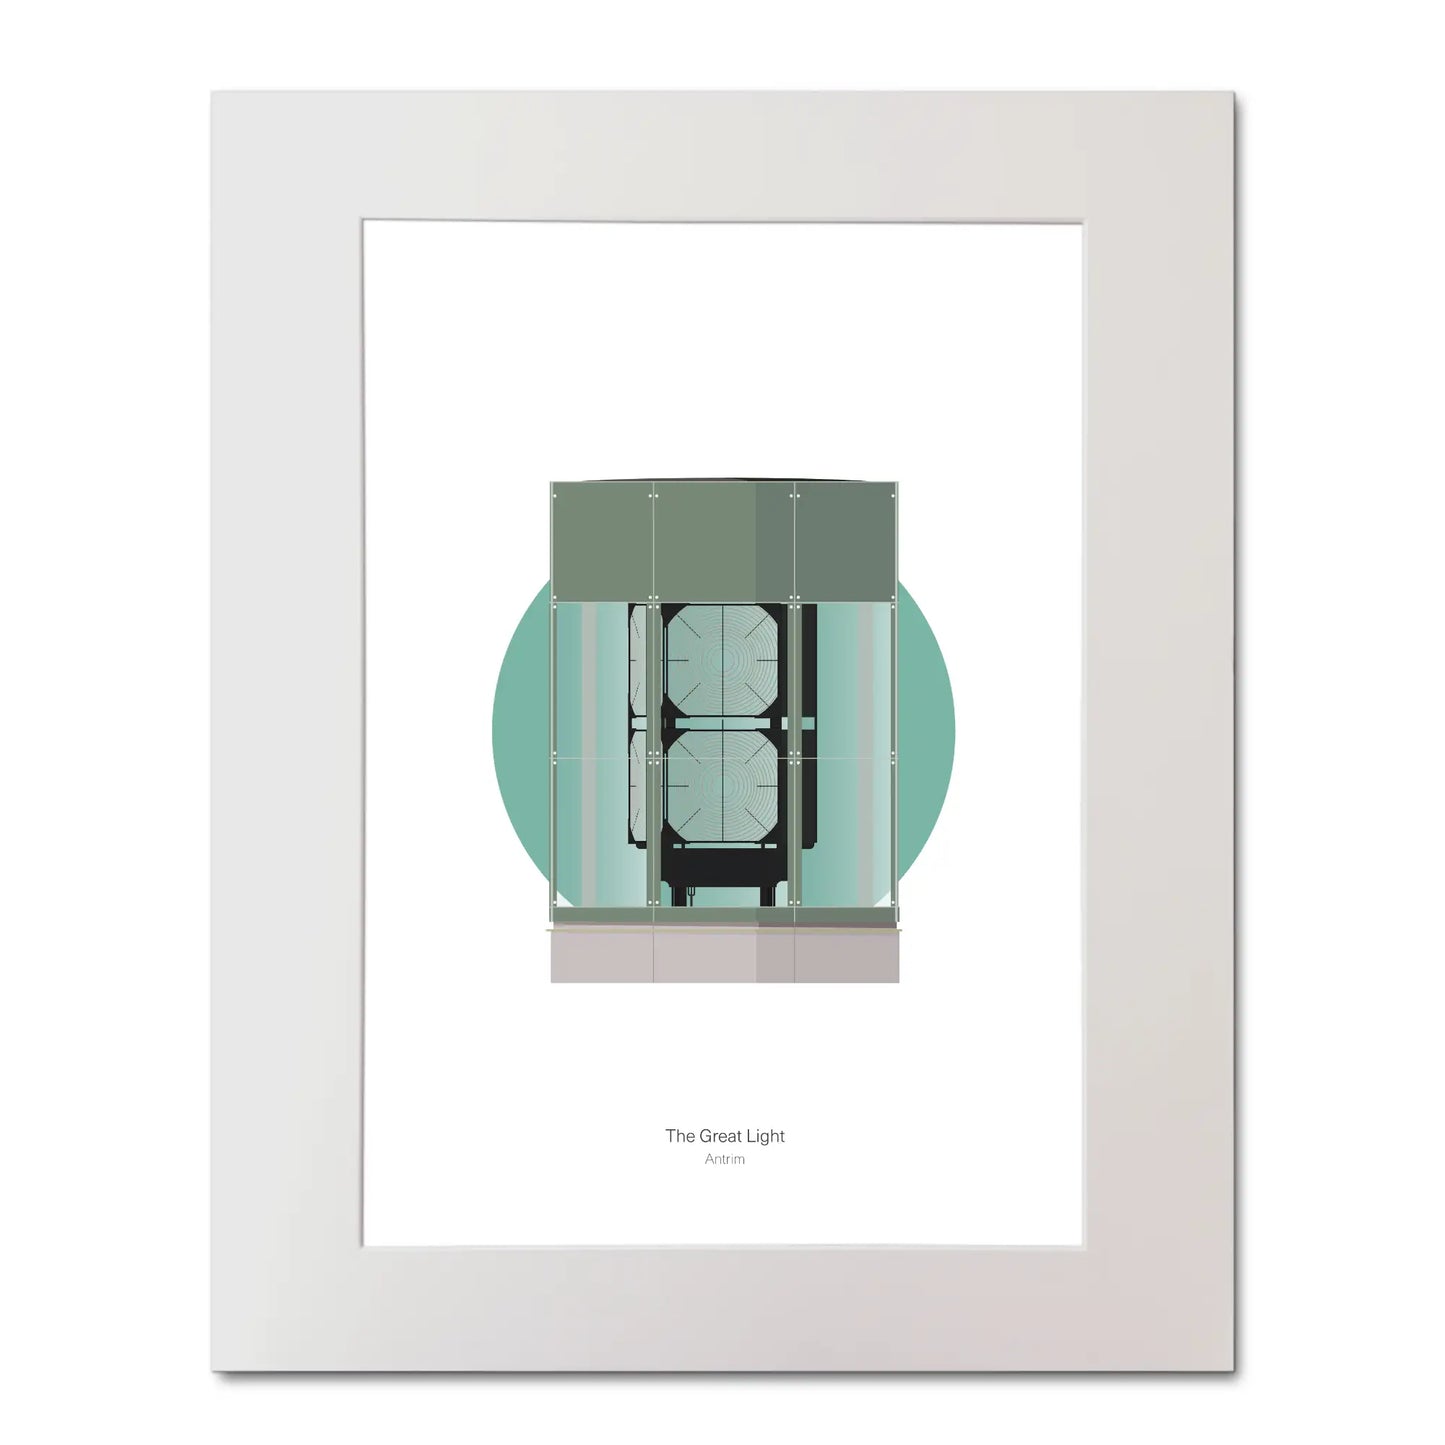 Contemporary illustration of The Great Light lighthouse on a white background inside light blue square, mounted and measuring 40x50cm.